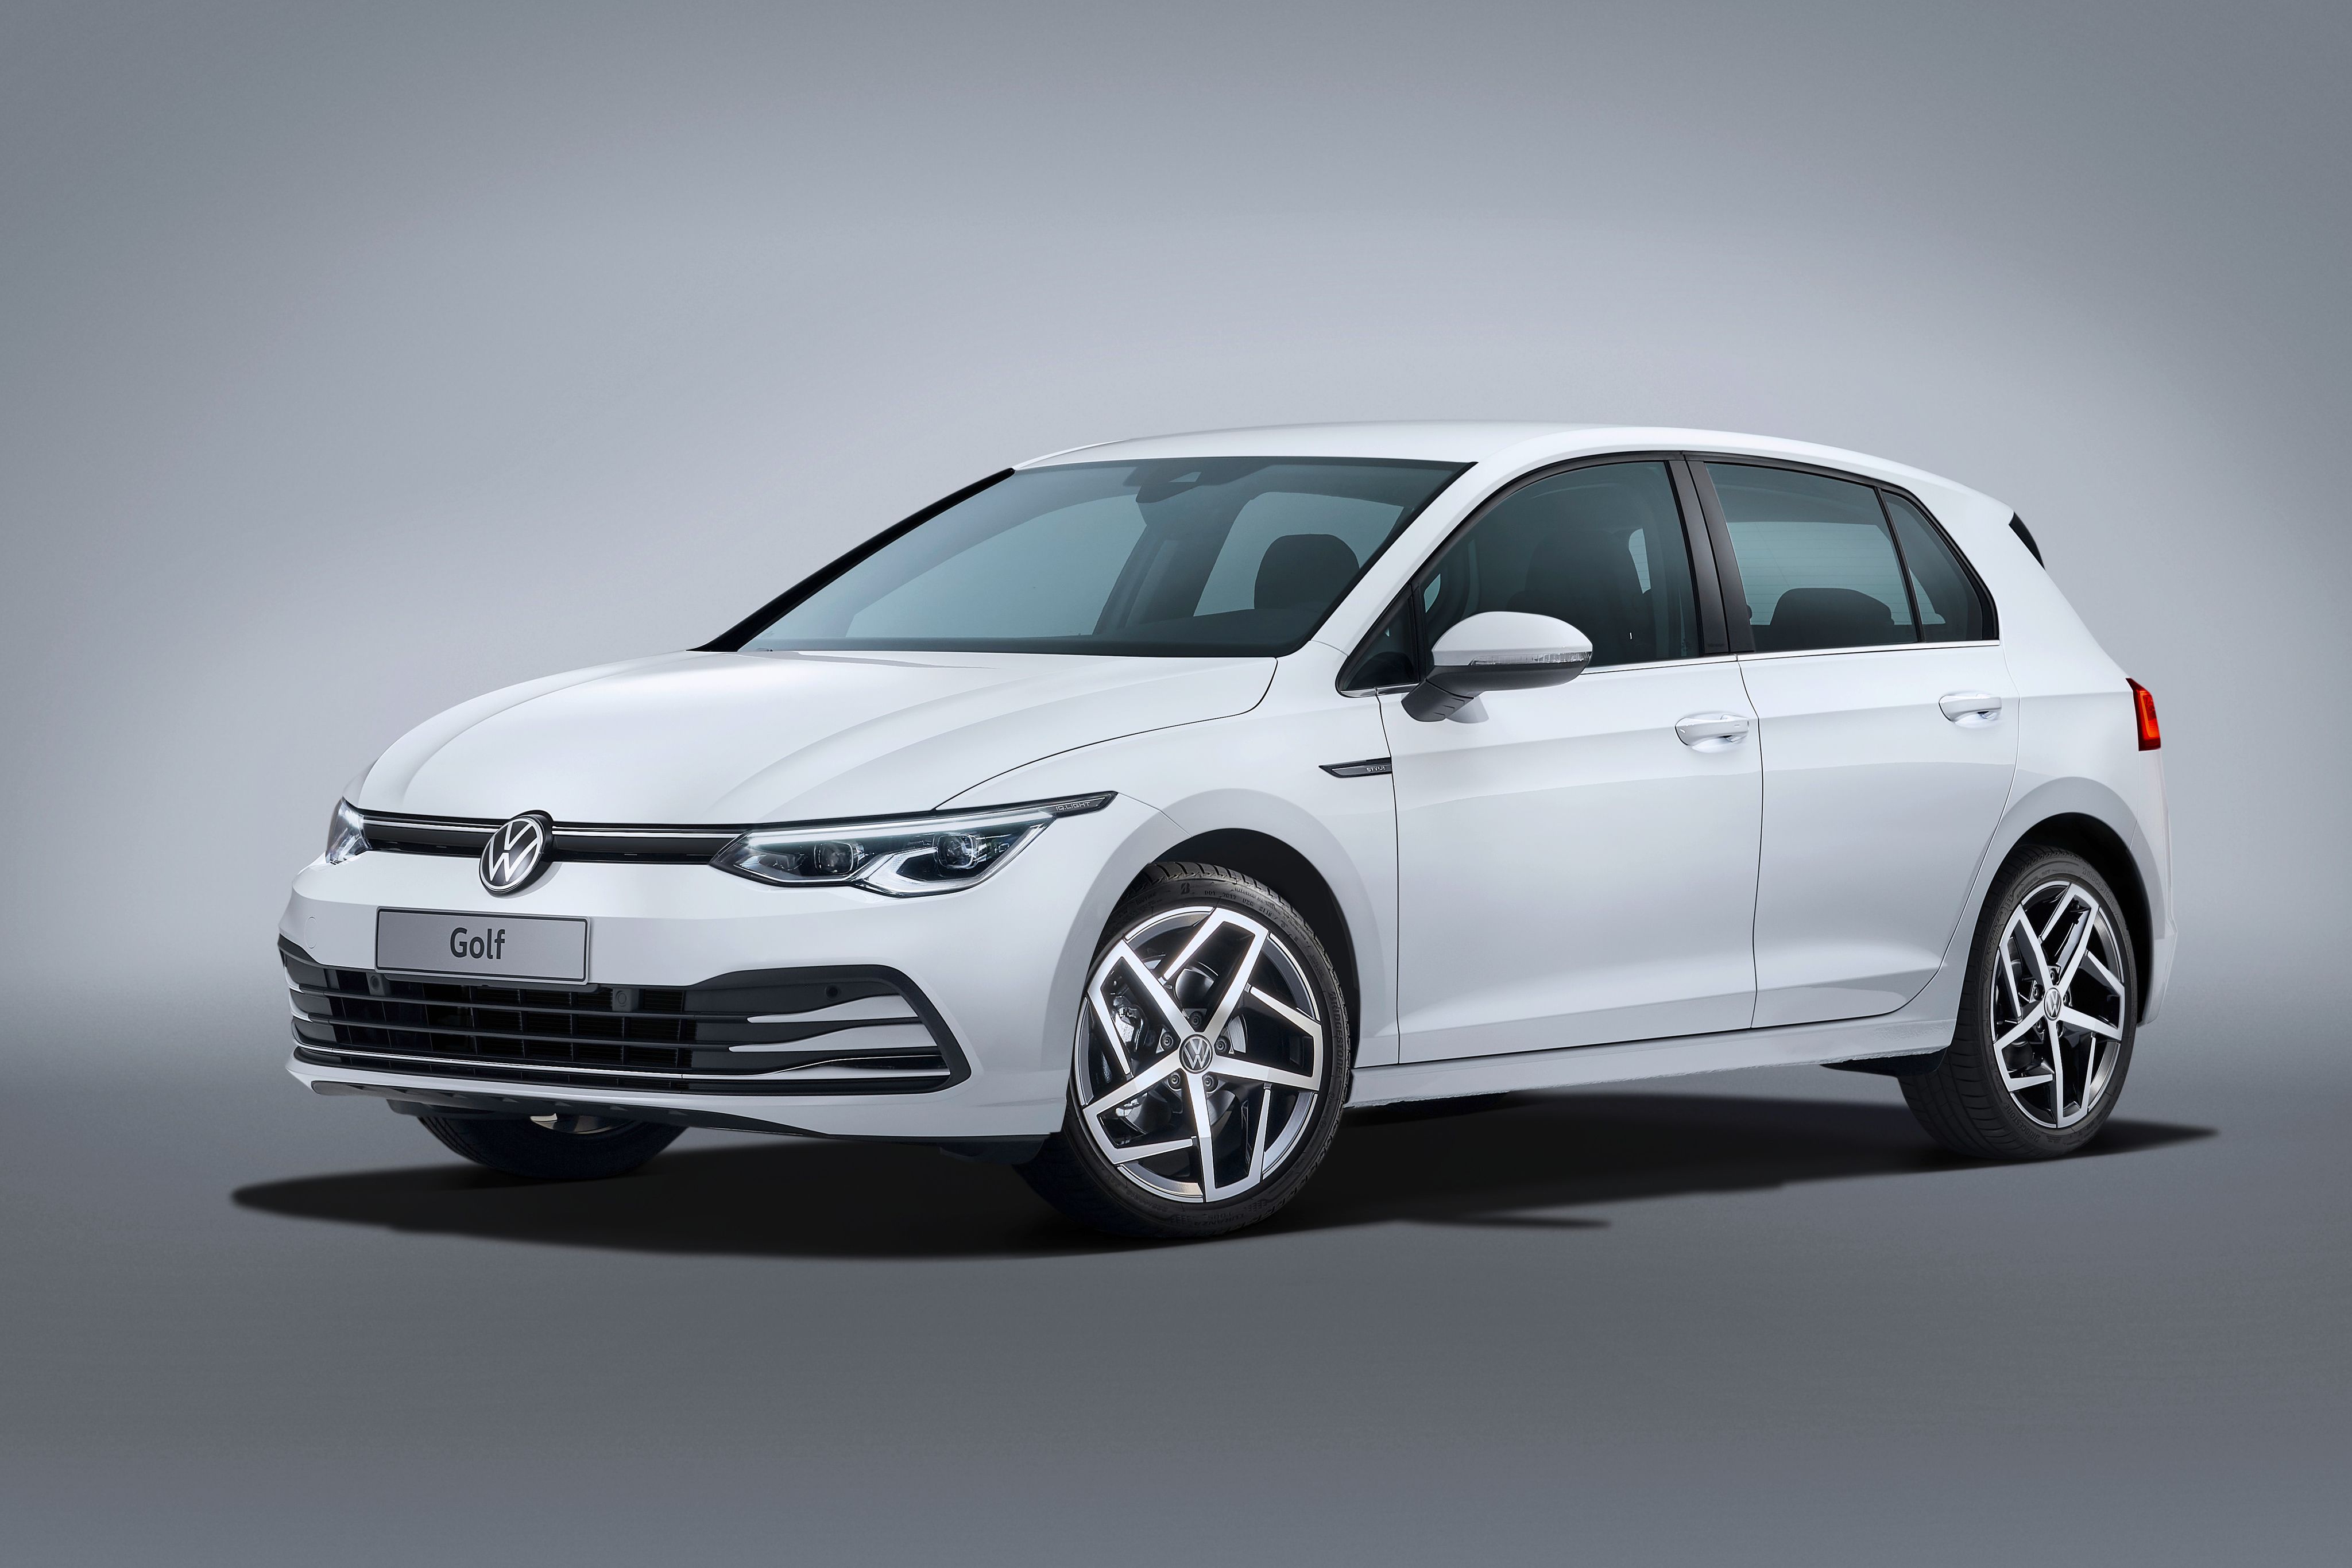 2020 With the 2020 Volkswagen Golf GTE rated at 242 horsepower, is there a future for the GTI?